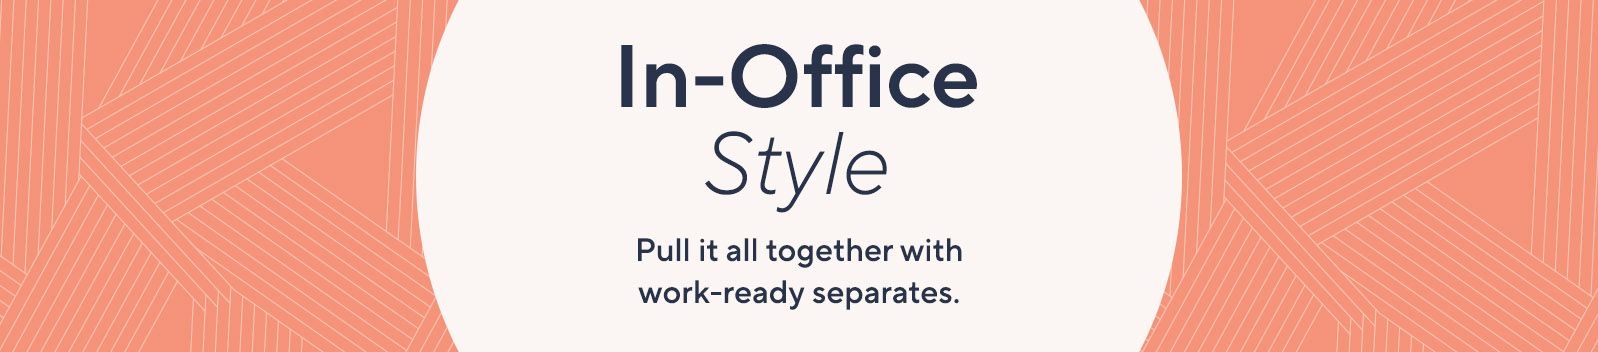 In-Office Style.  Pull it all together with work-ready separates.